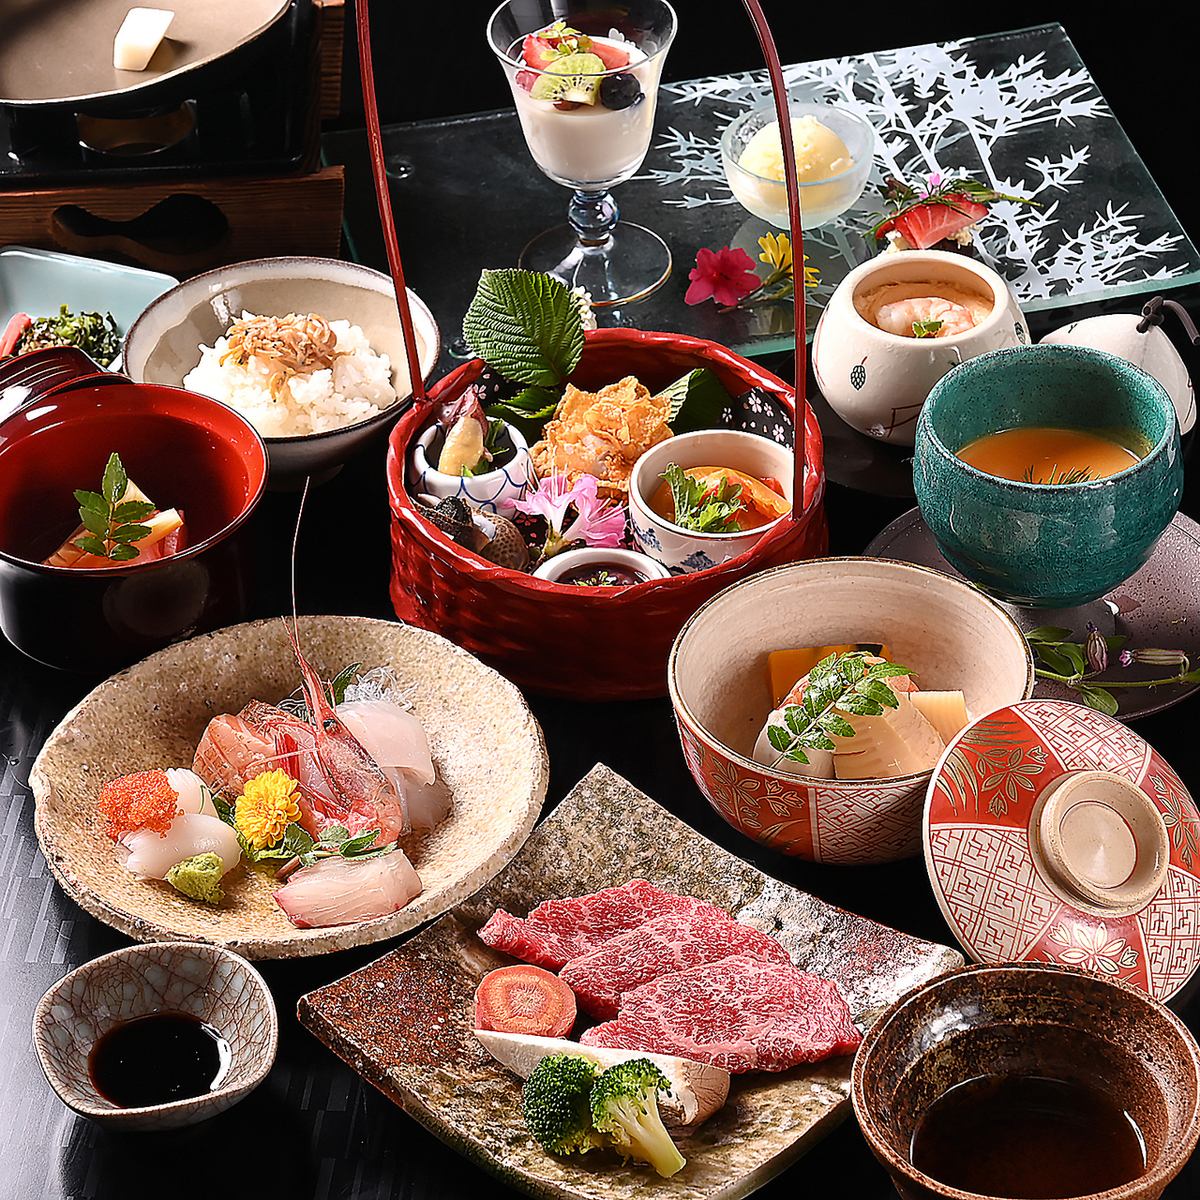 Recommended for special occasions such as celebrations, payments, and memorial services ♪